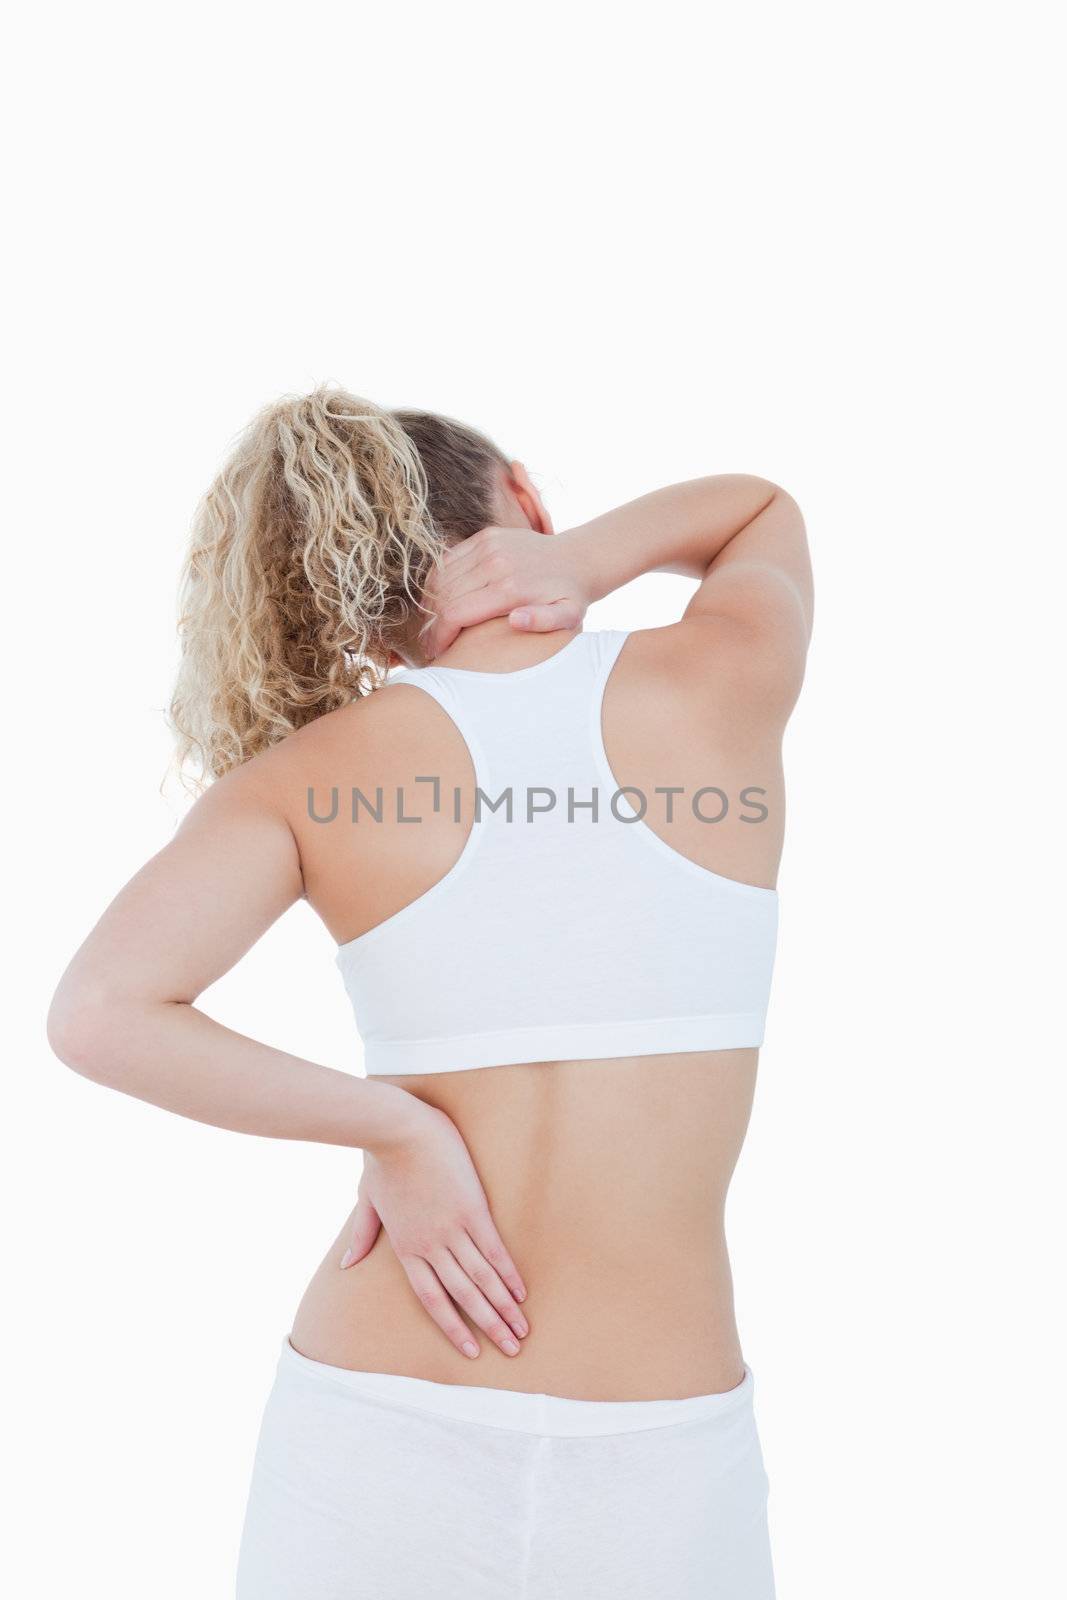 Blonde woman touching her painful neck and back against a white background